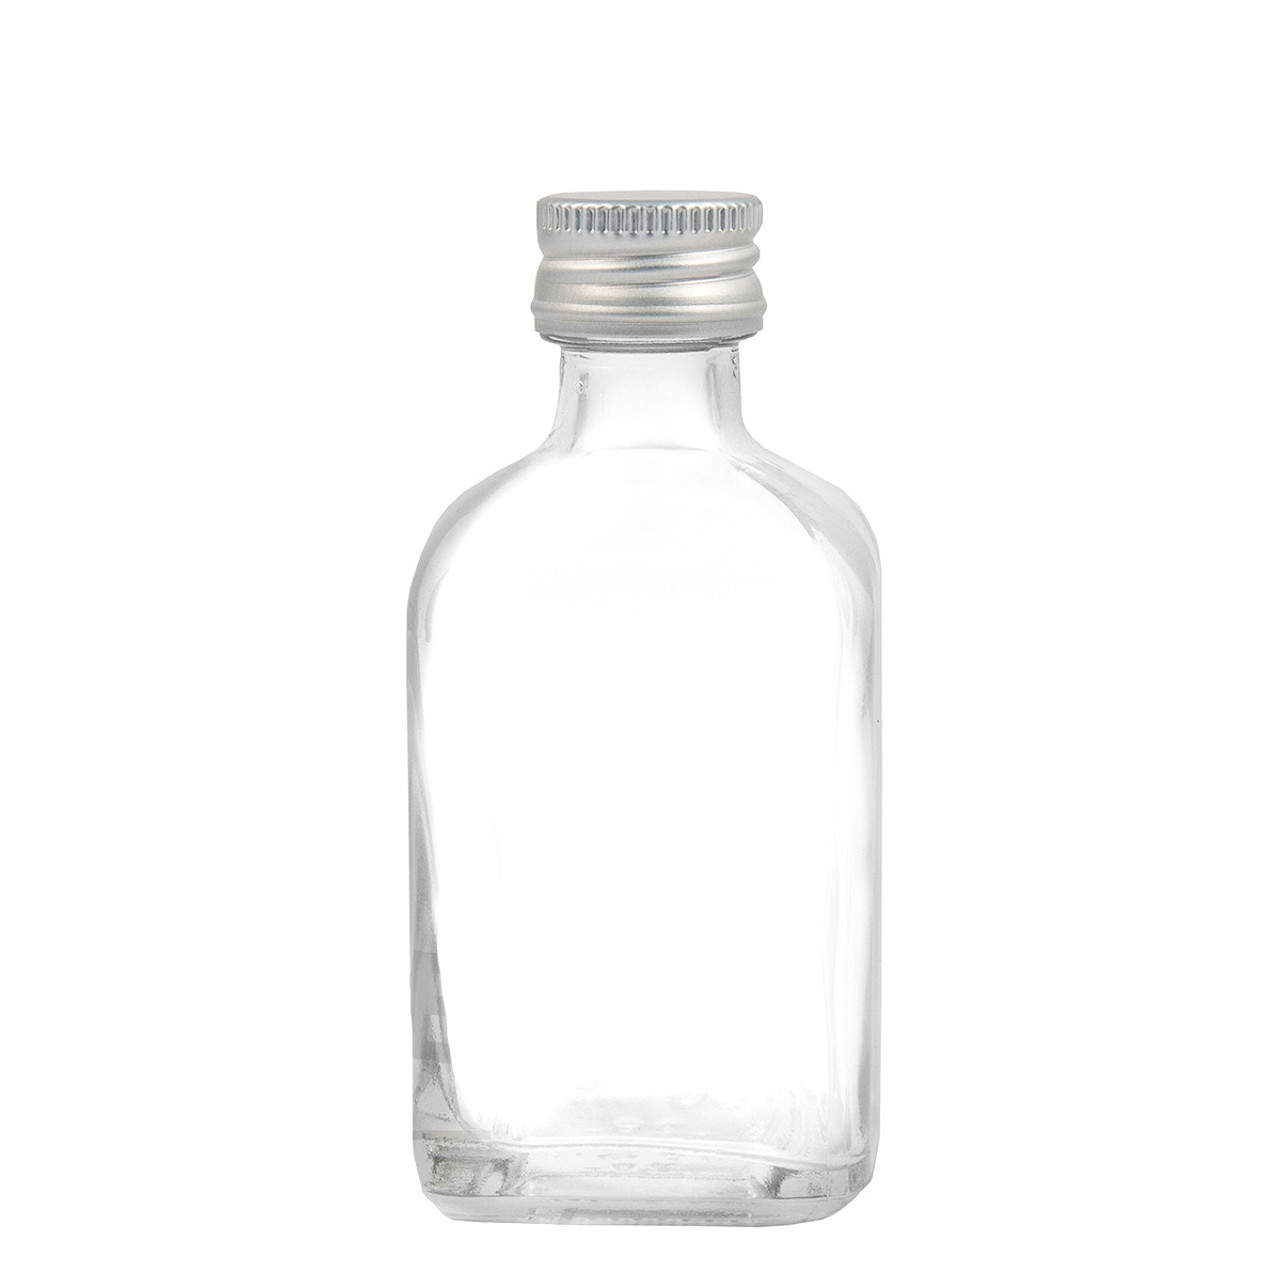 https://cdn11.bigcommerce.com/s-6e2ef/images/stencil/1280x1280/products/4312/20383/50ml_Square_Bottle_-_FRASCA_50_w-_with_Lid_-_001__46871__96308.1663765845.jpg?c=2